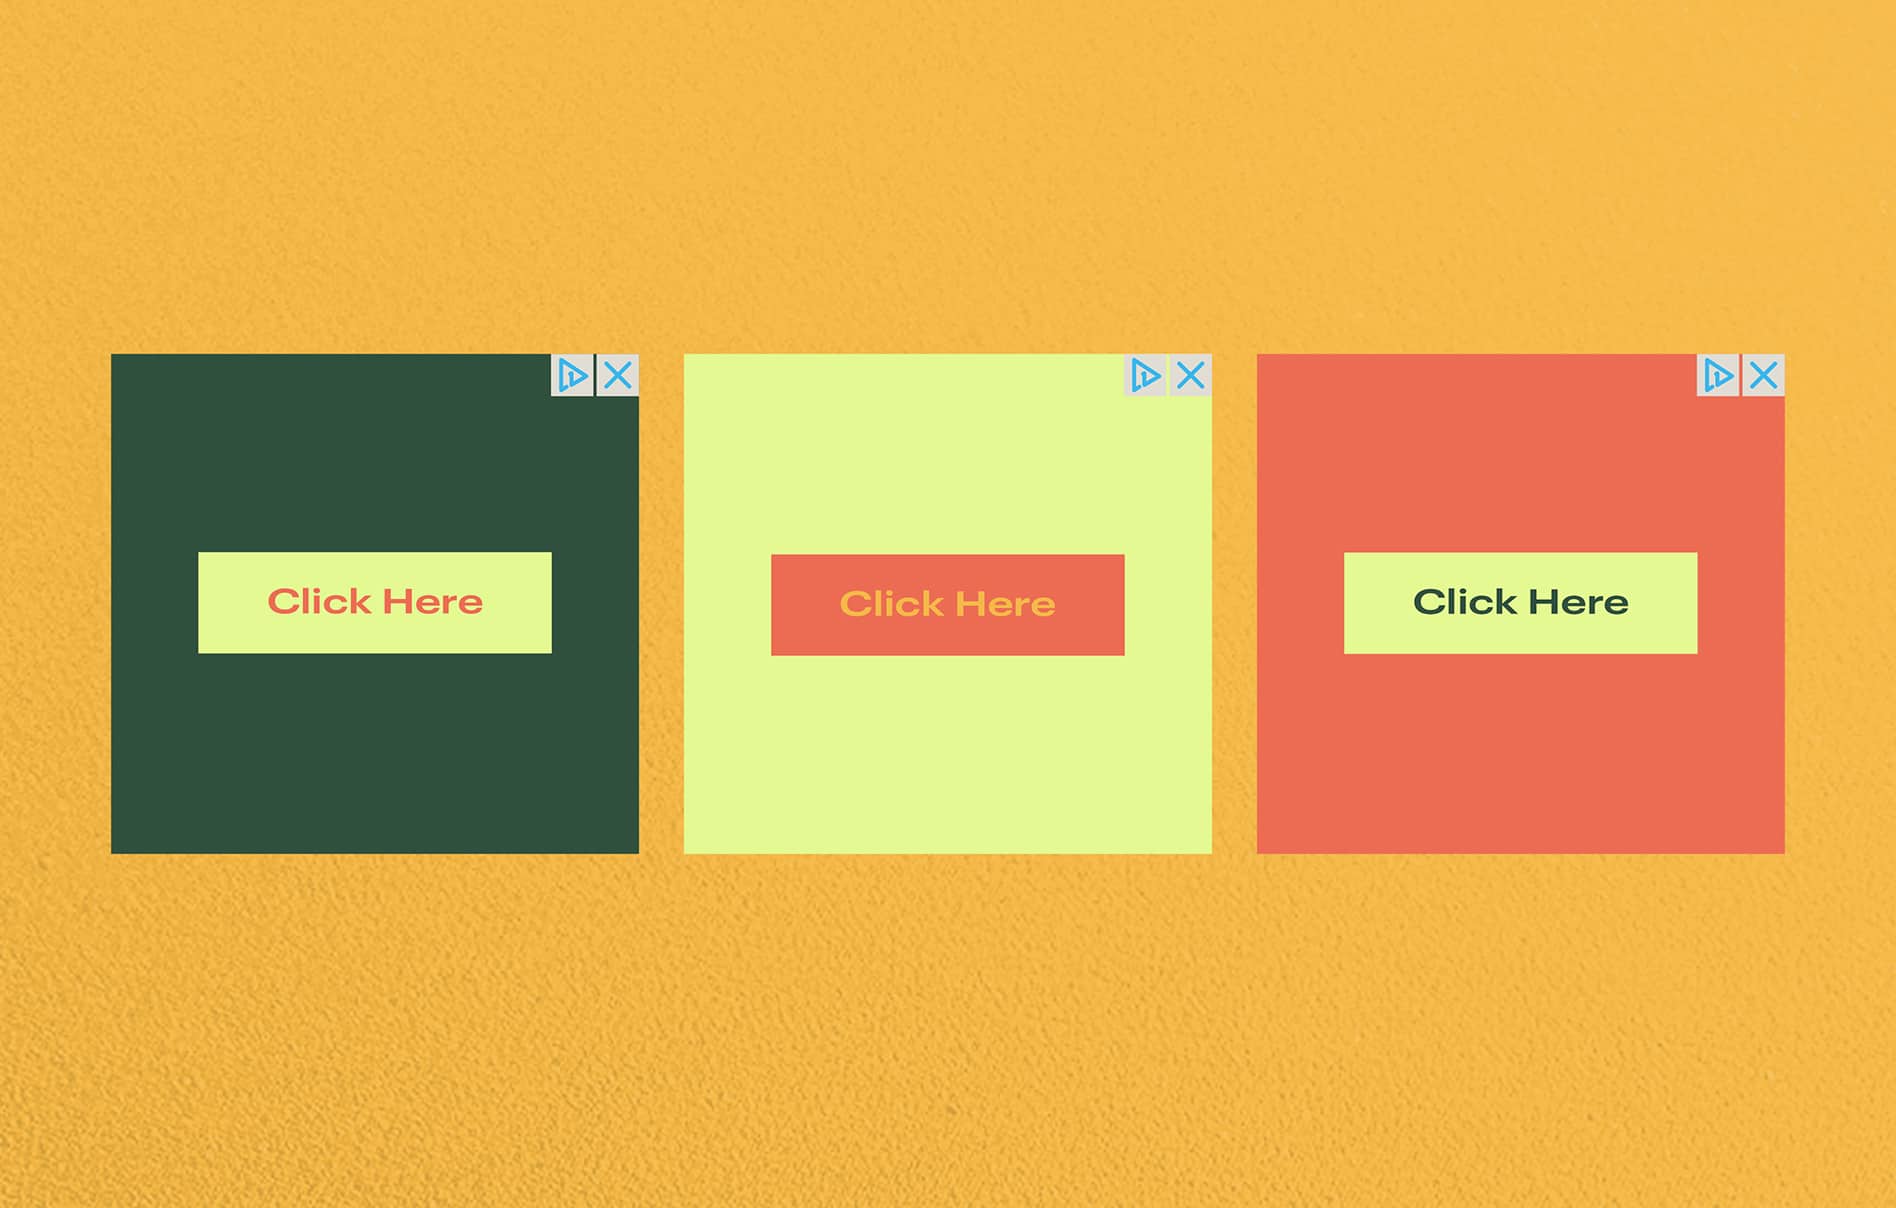 Image of three banner ads each with a button saying "click here"